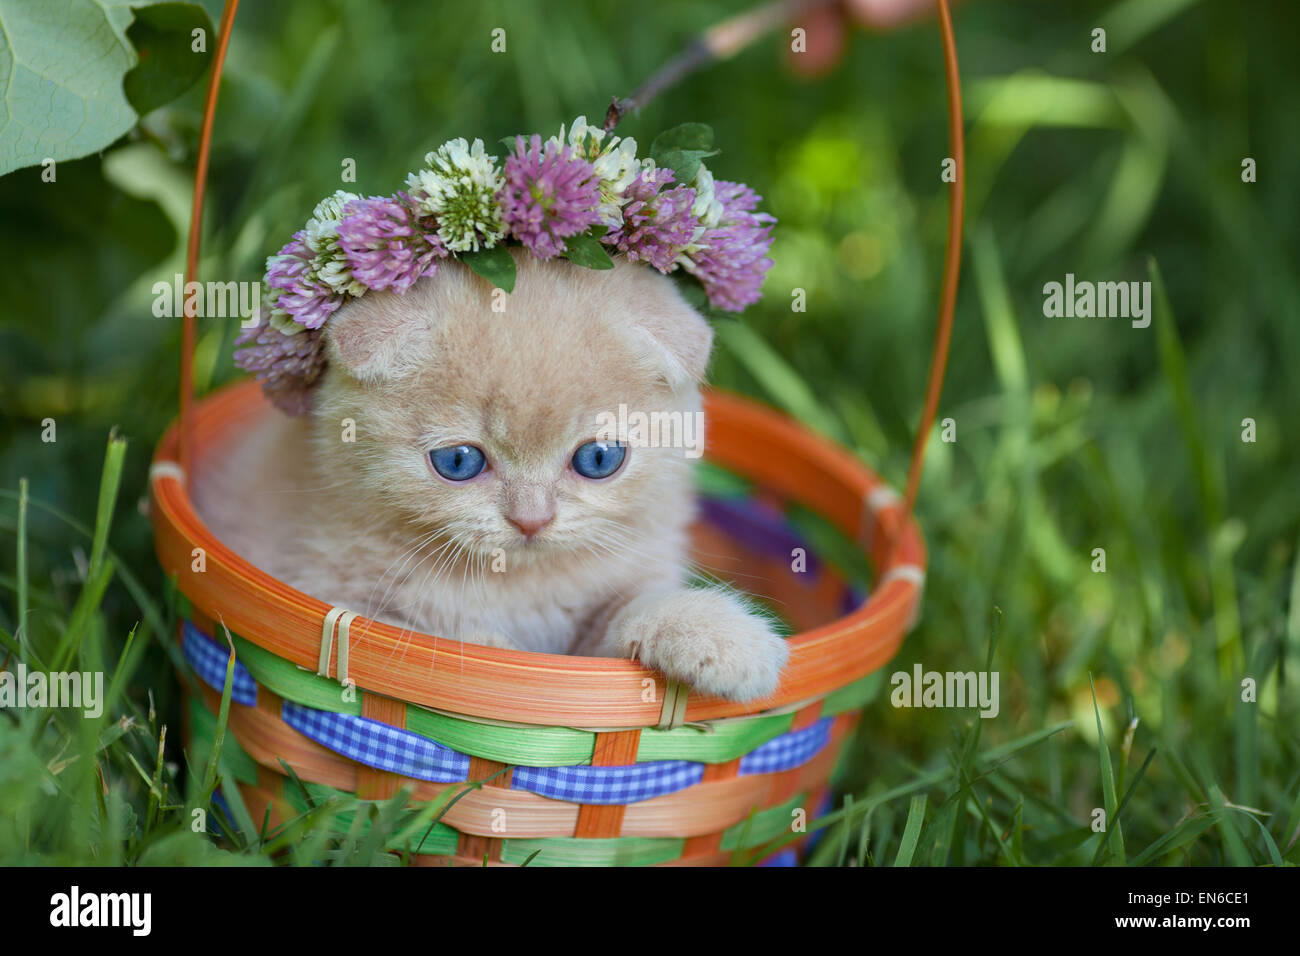 Cute kitten crowned with chaplet in a basket Stock Photo